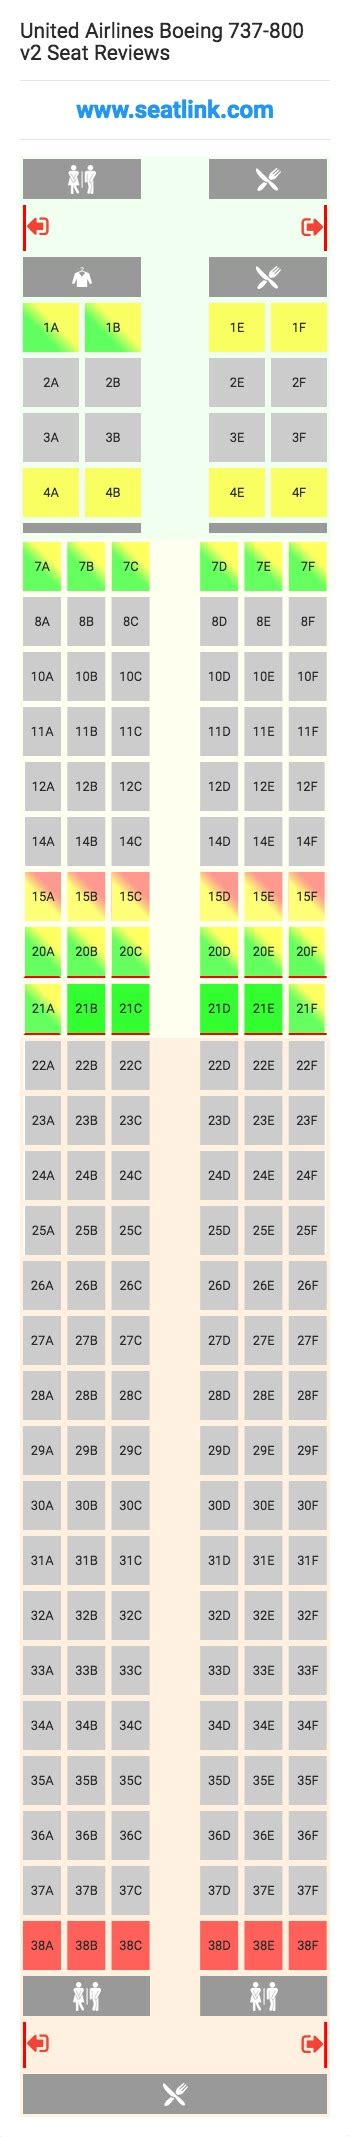 united airlines seat selection map